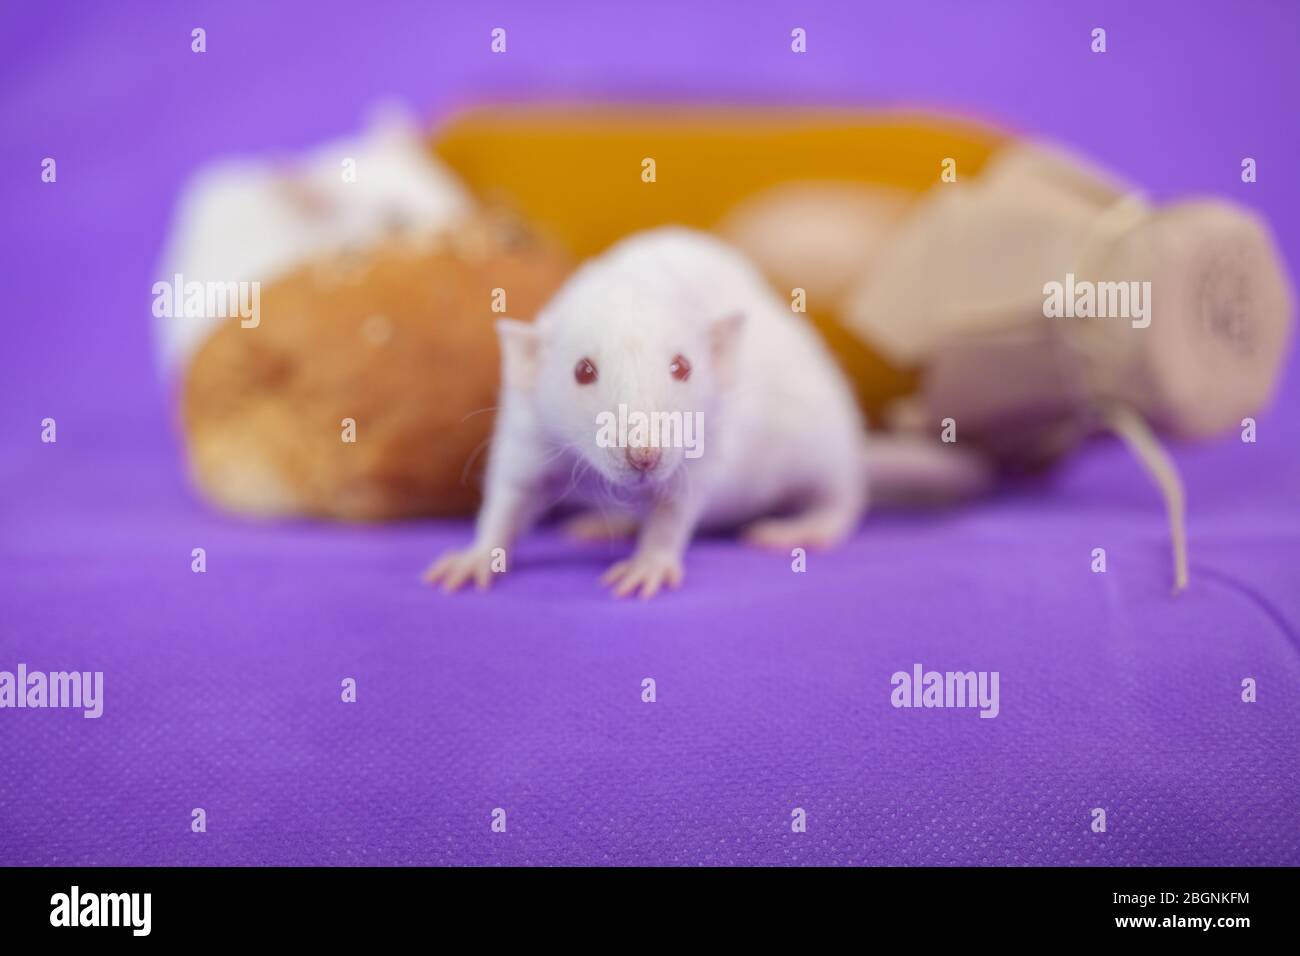 Rats on a purple background. Furry mice Stock Photo